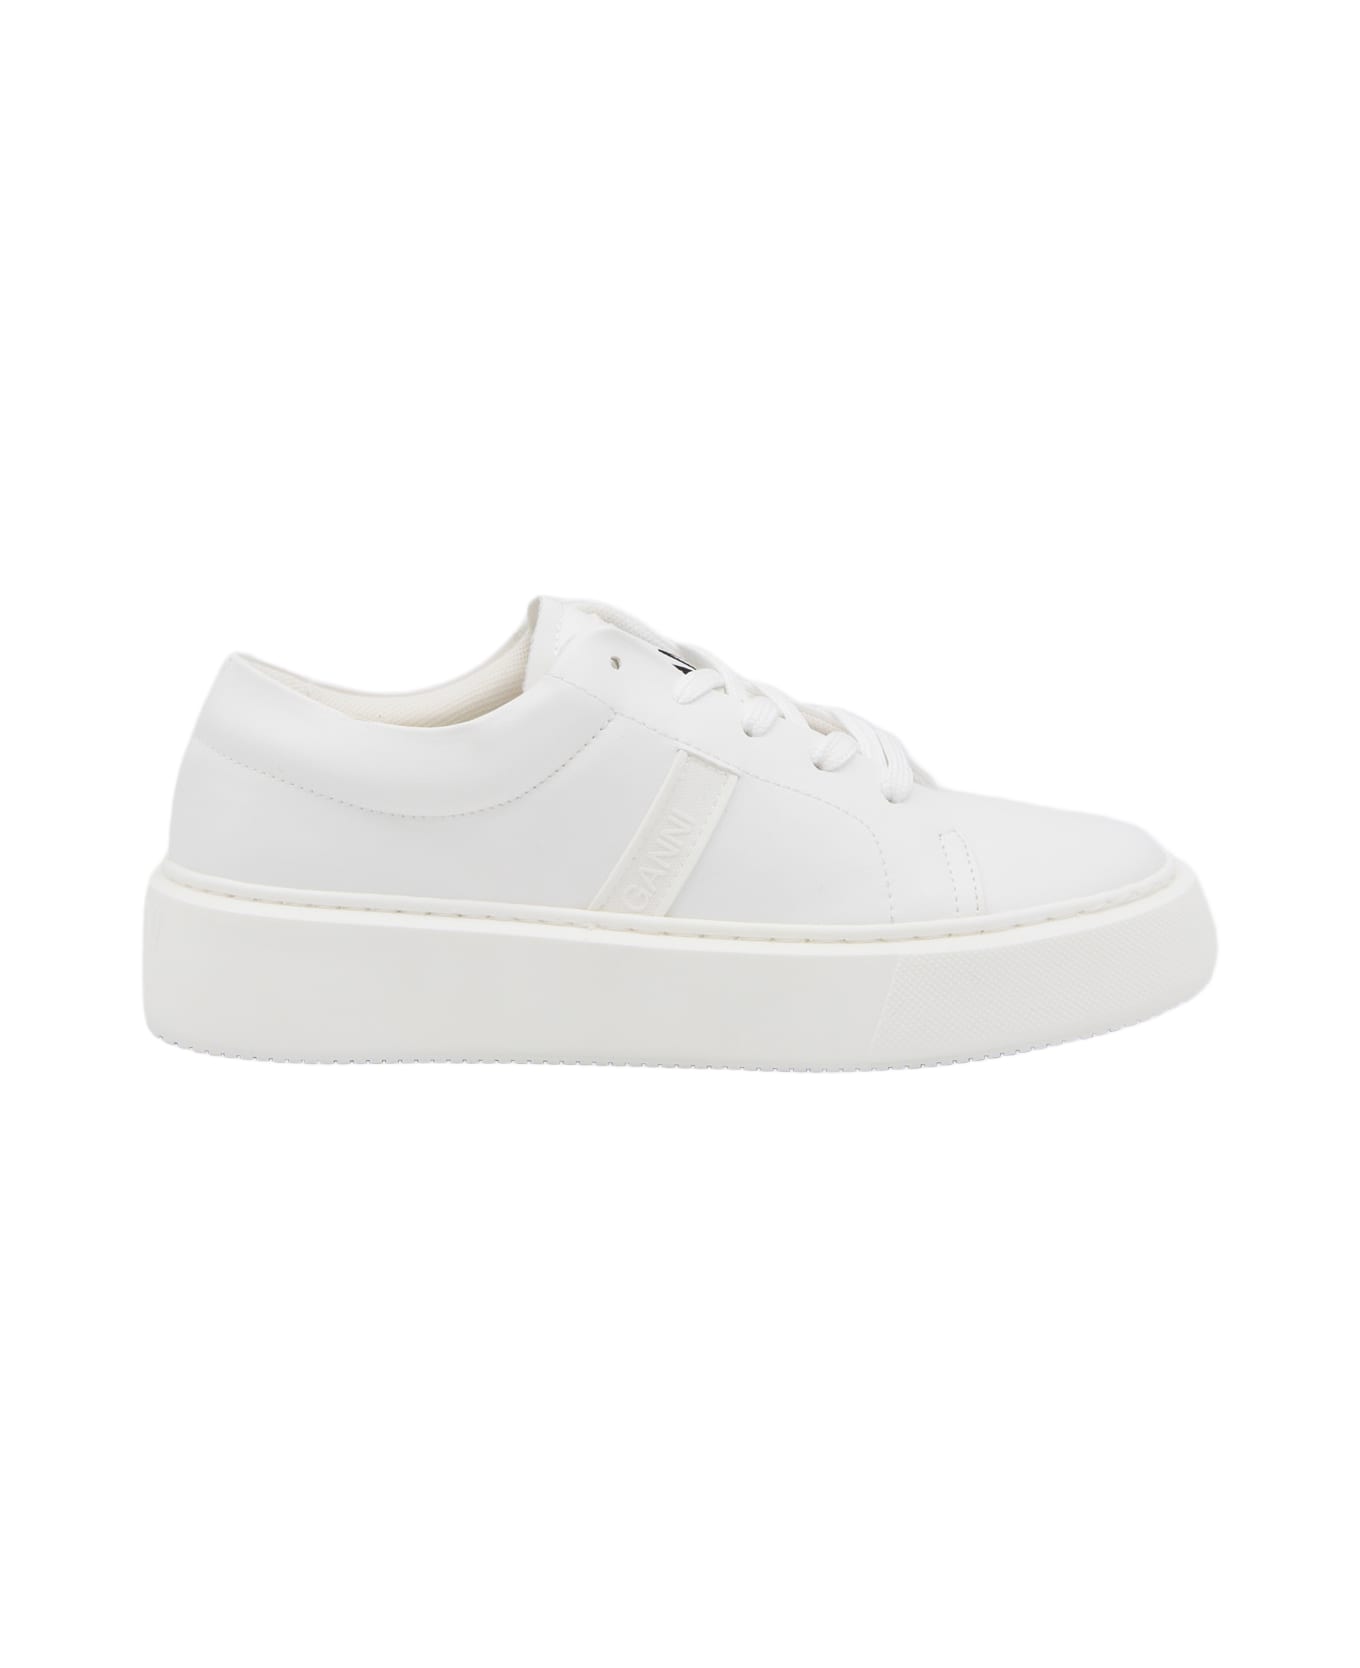 Ganni White Faux Leather Sporty Sneakers - Egret